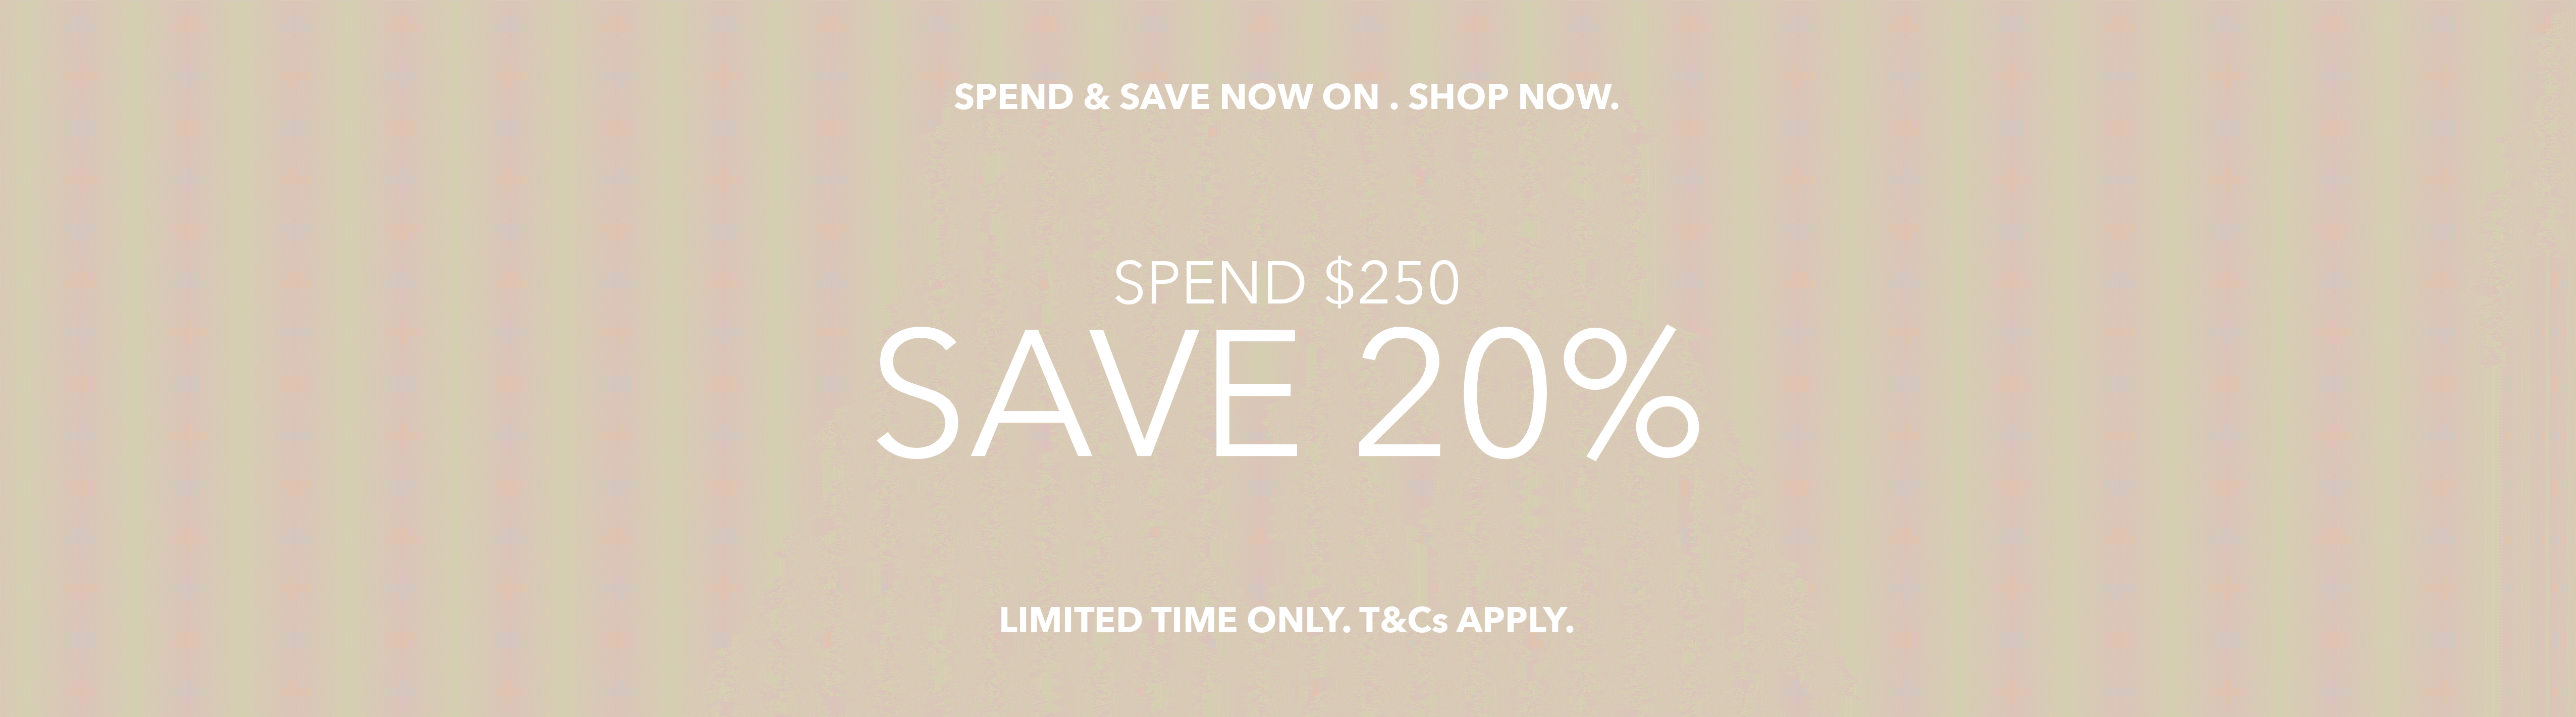 Spend & Save Now On, Spend $250 Save 20%